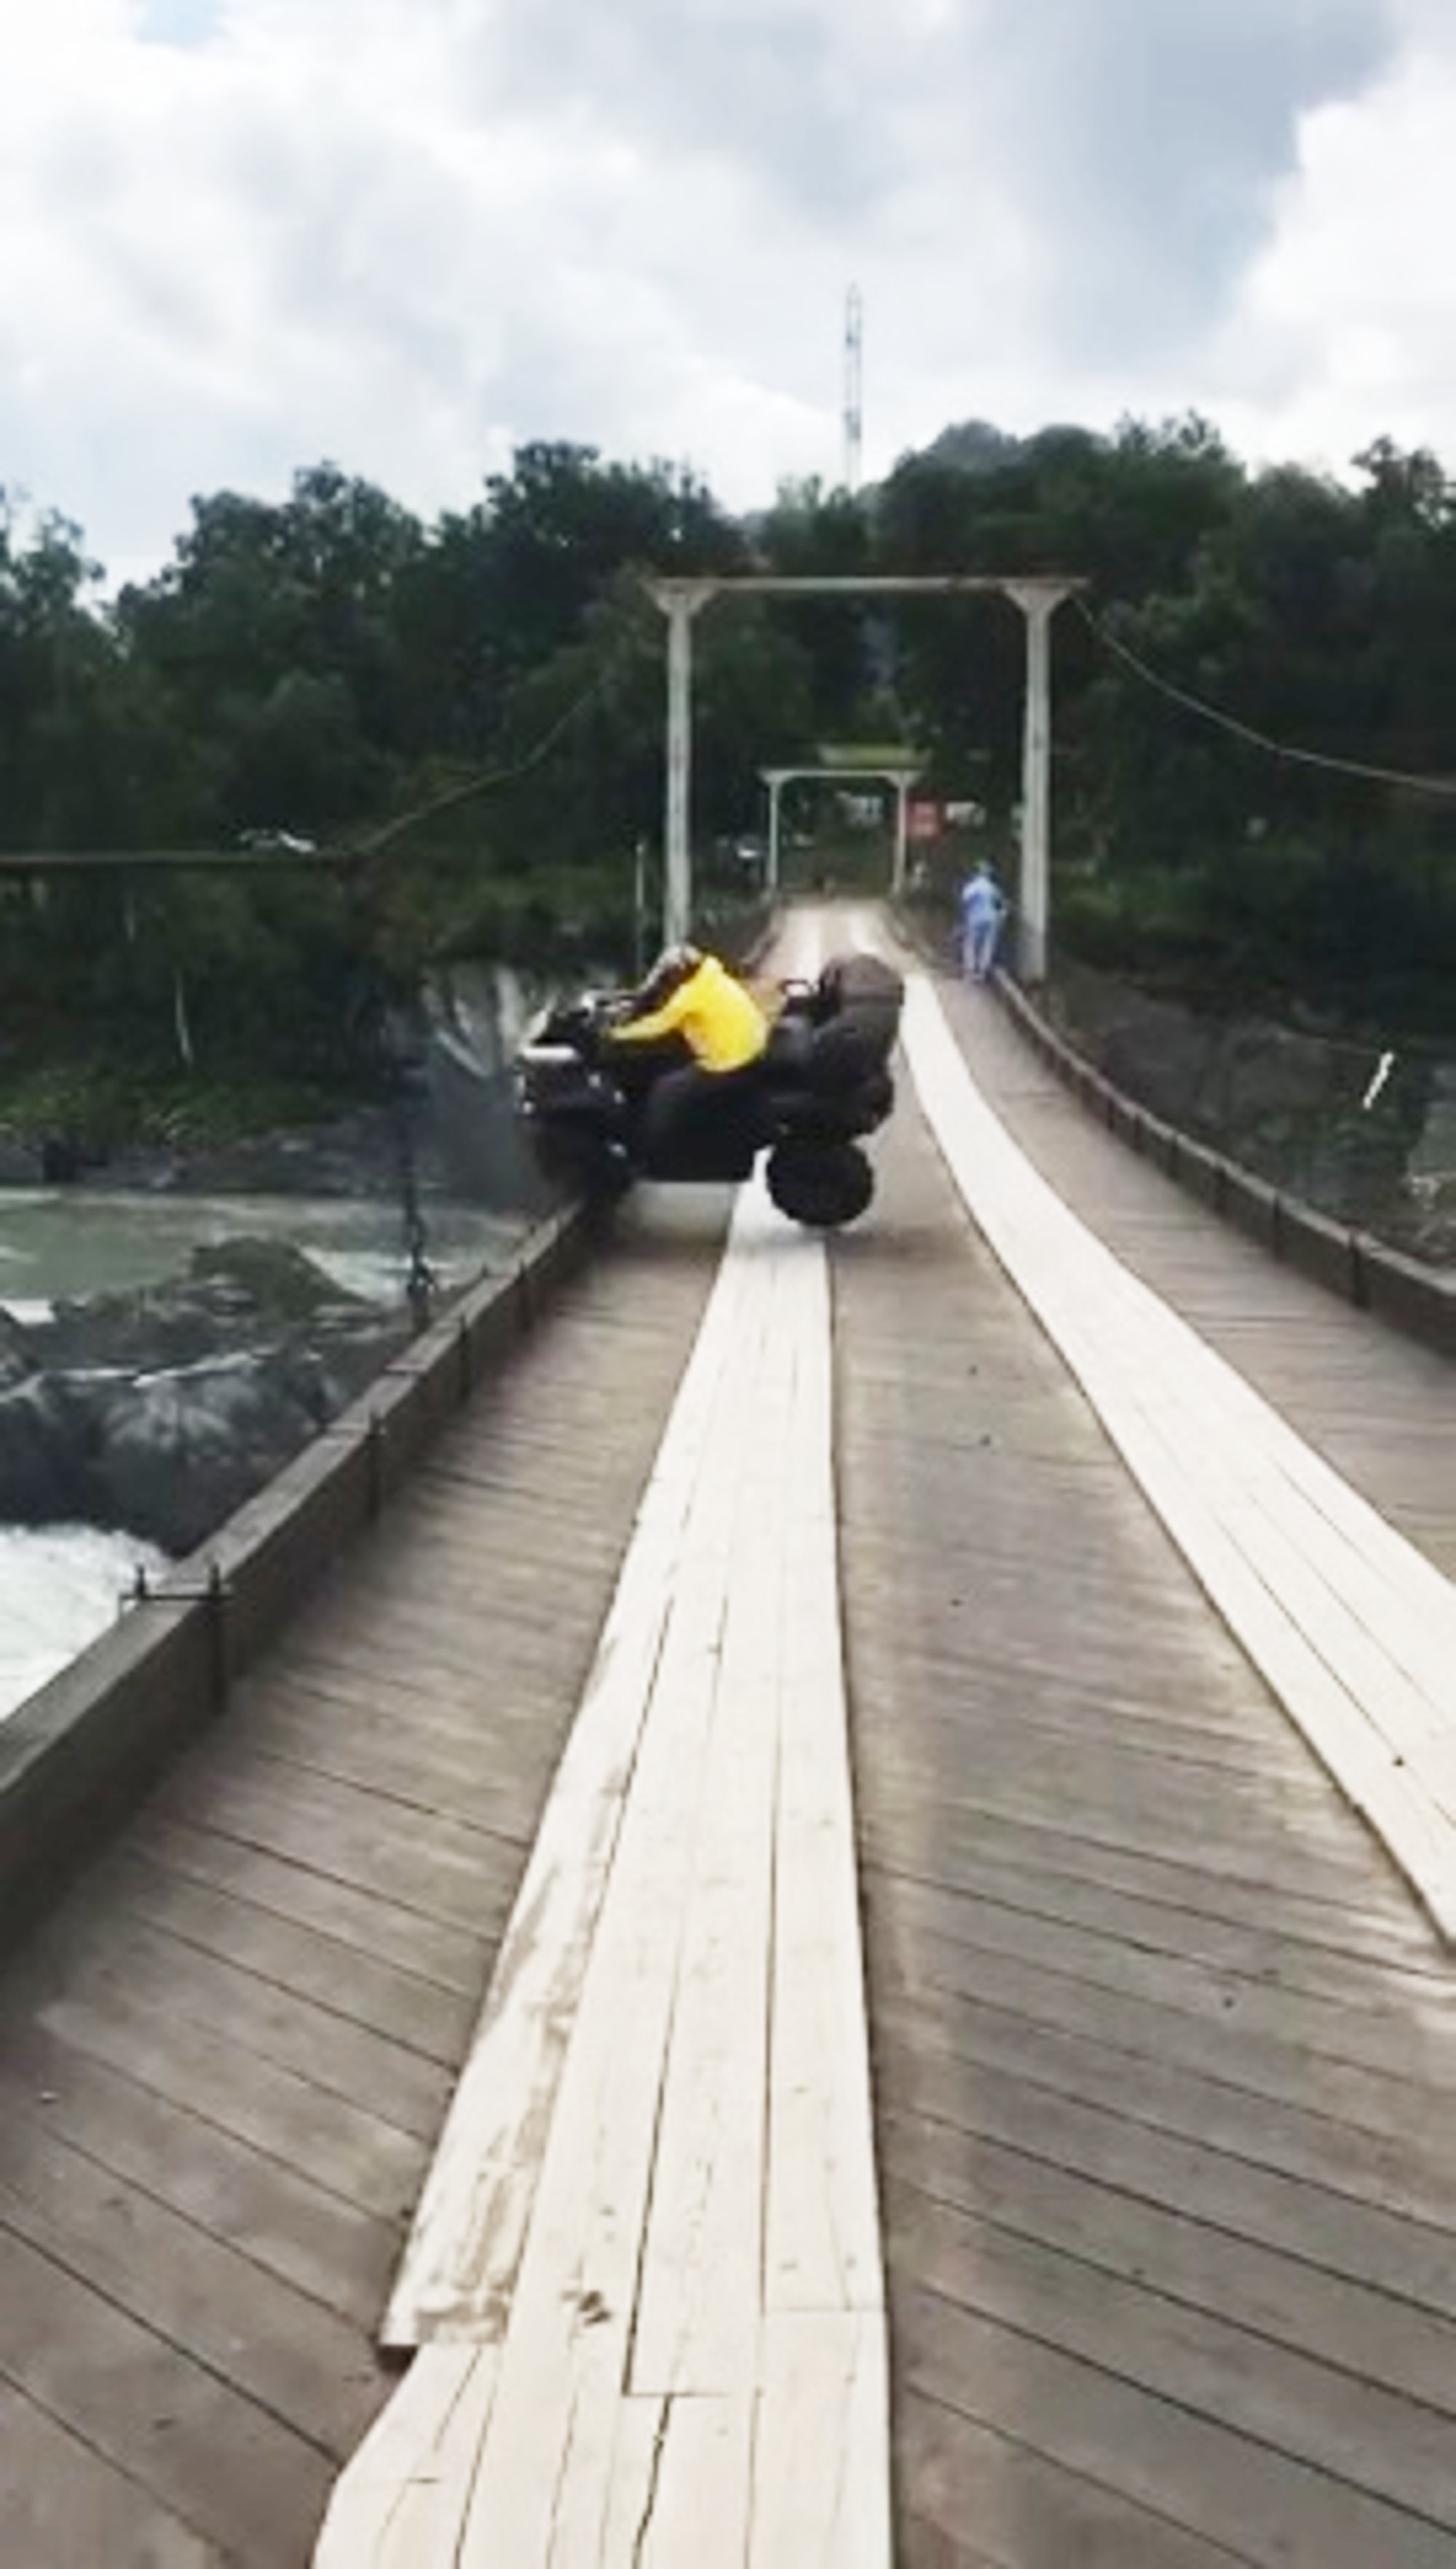 Read more about the article Quadbiker Thrown From Bridge Into Fast-Flowing River